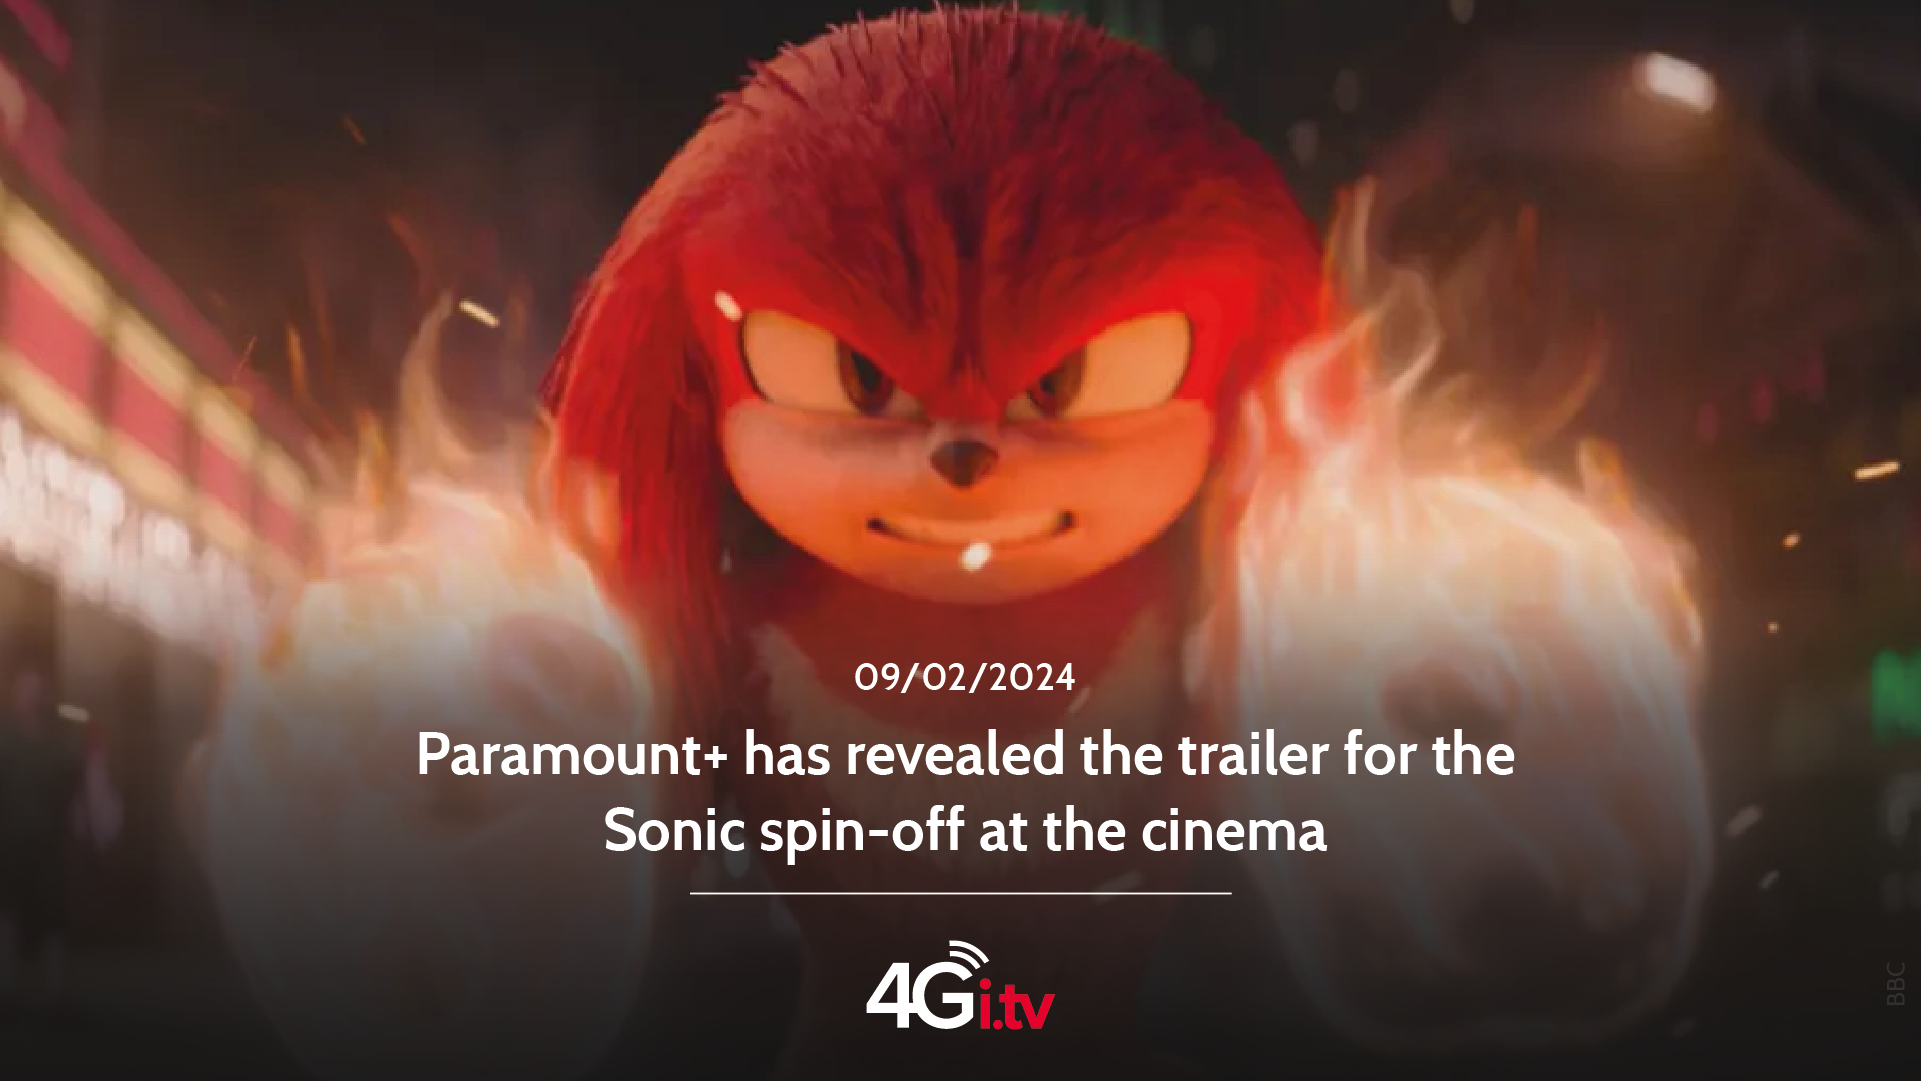 Подробнее о статье Paramount+ has revealed the trailer for the Sonic spin-off at the cinema 